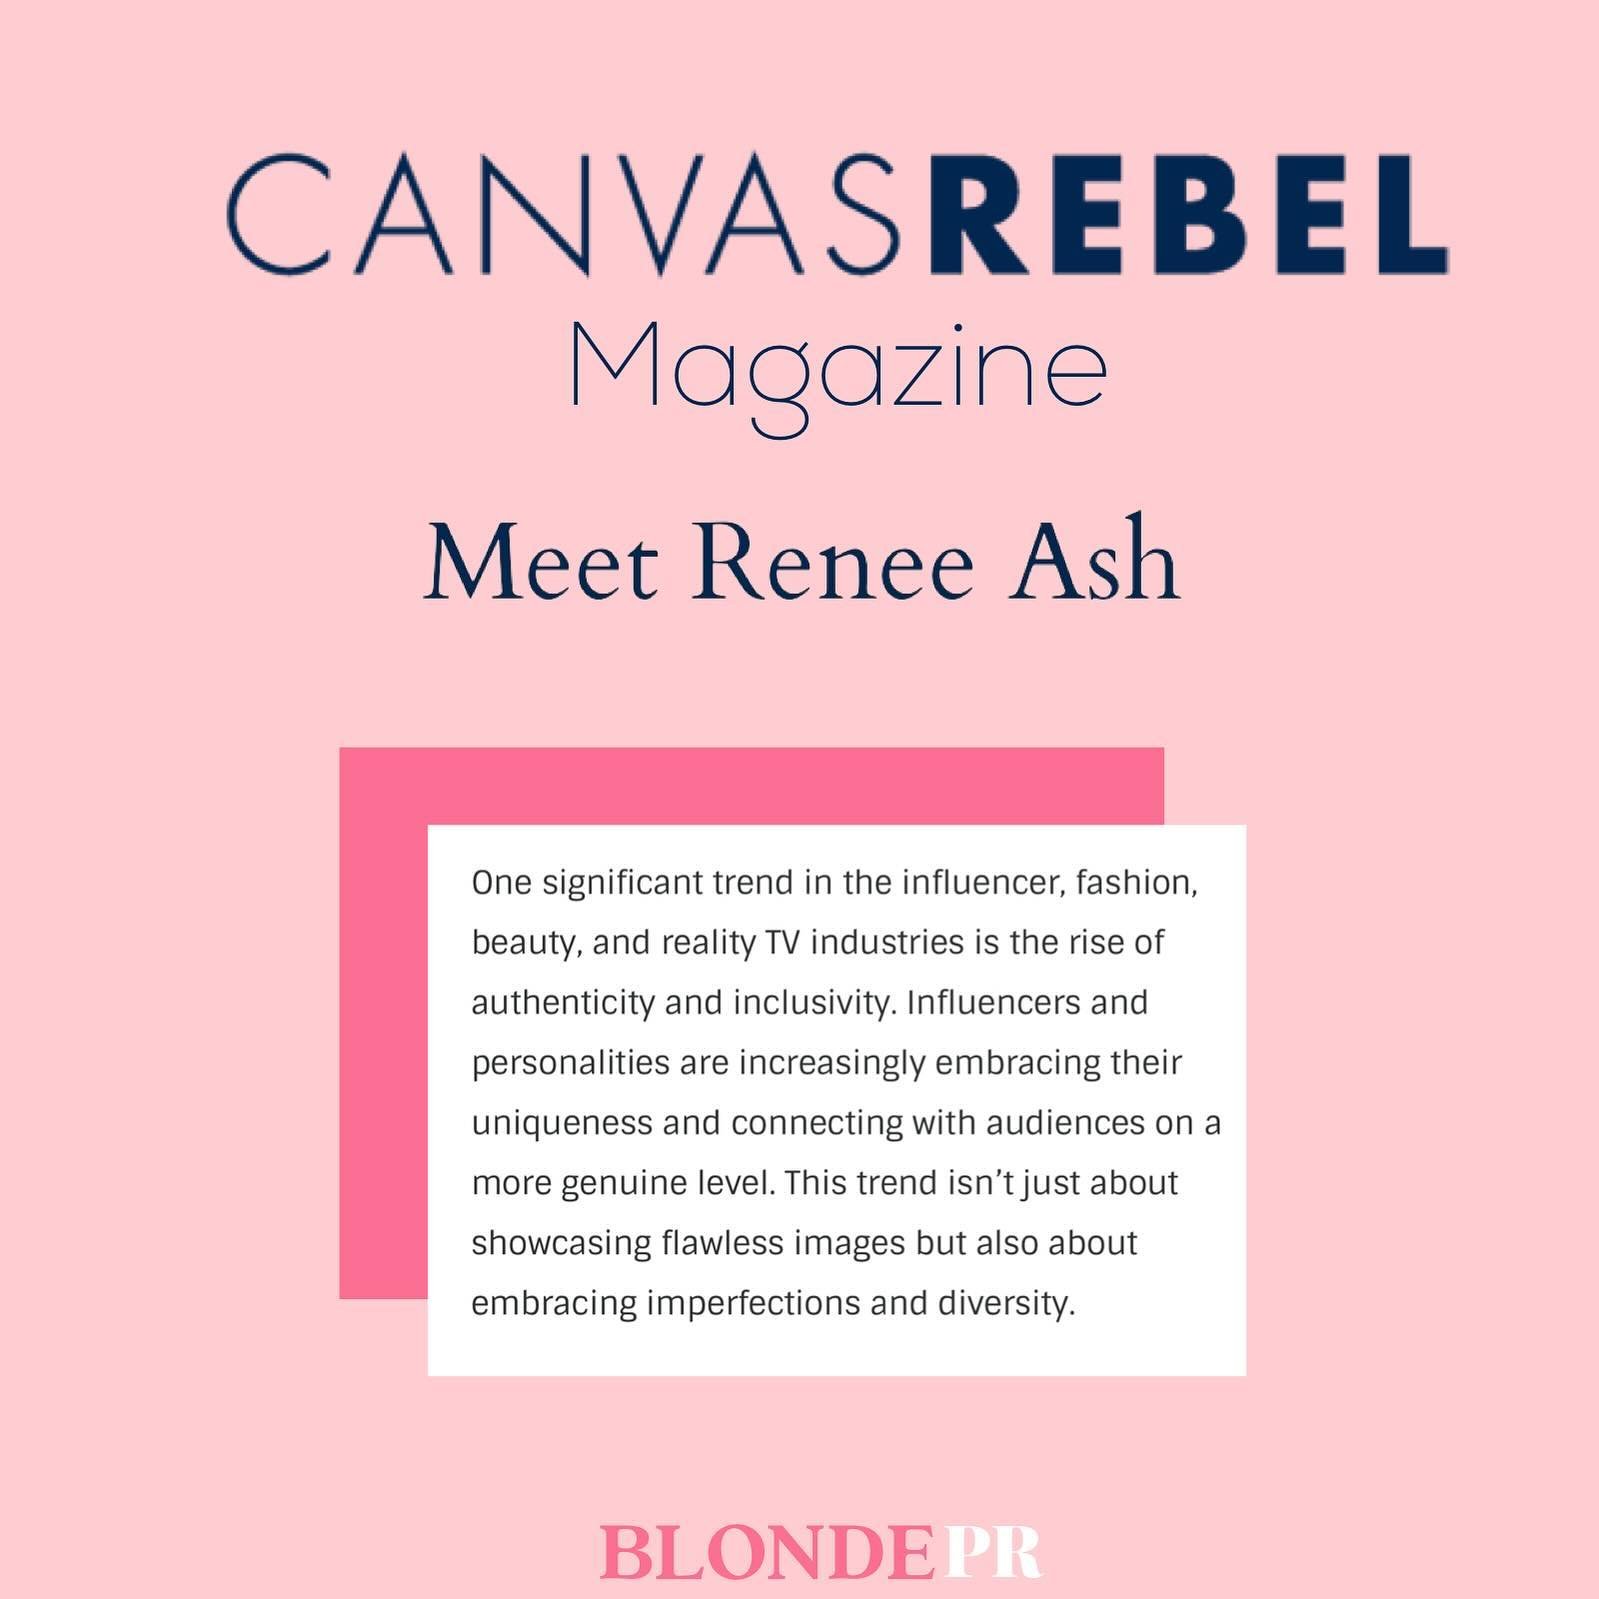 We&rsquo;re loving @peacock&rsquo;s Love Undercover so far &amp; can&rsquo;t get enough of @renee.ash! Meet her in more detail in the latest @canvasrebel magazine 💕

#blondepr